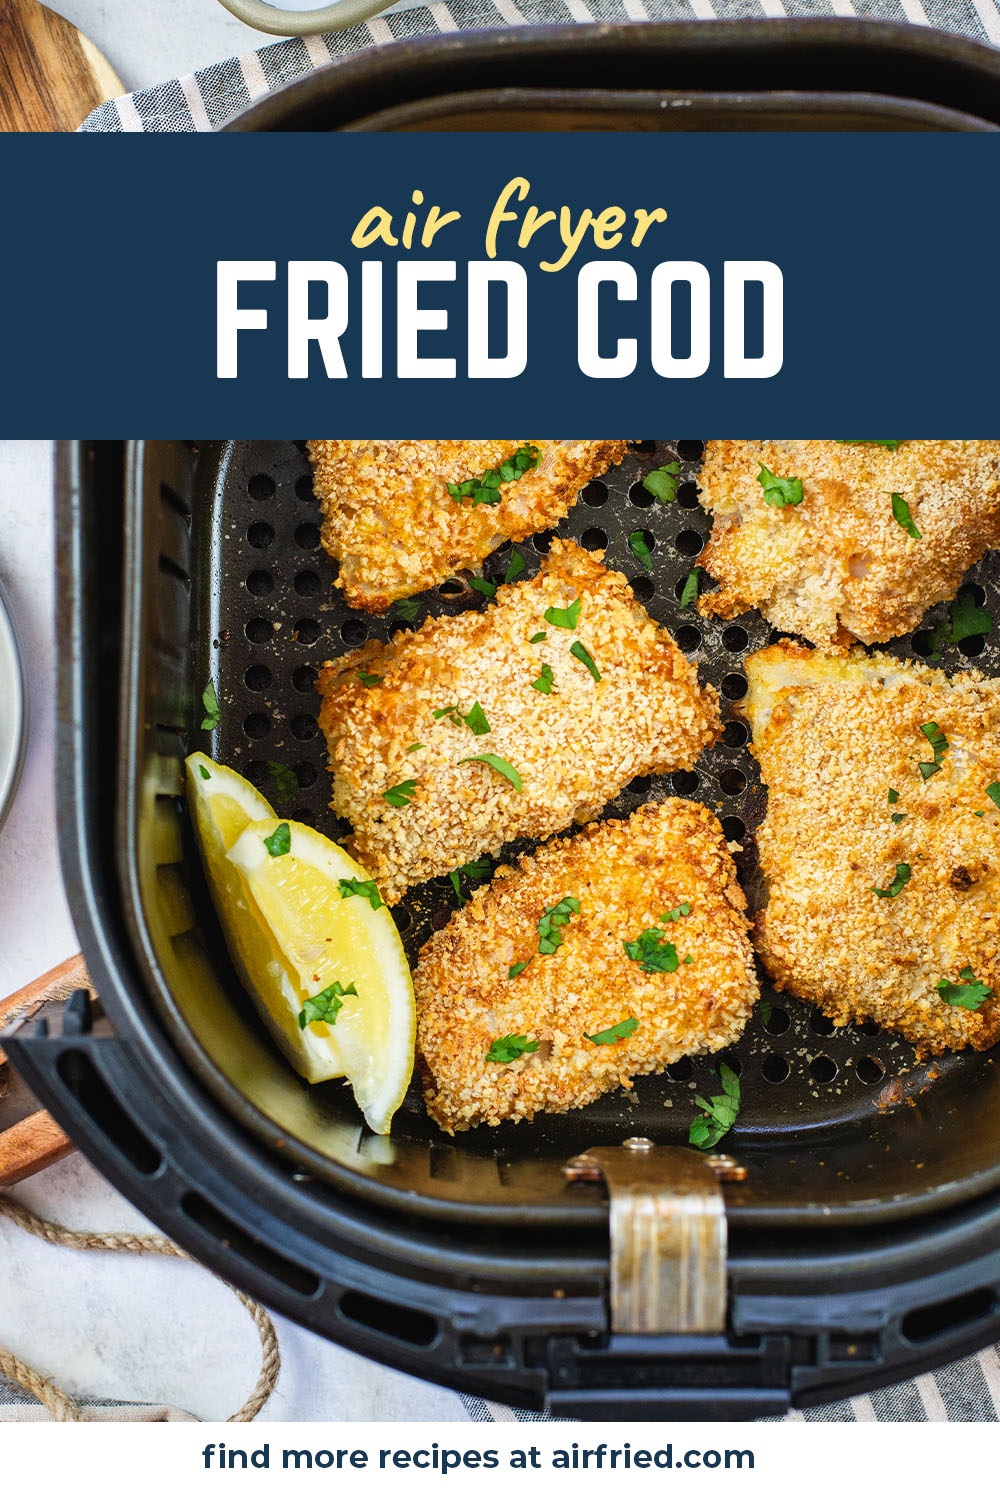 Air fried cod was super easy to make.  The breading is lightly seasoned, and the fish came out nice and flaky!